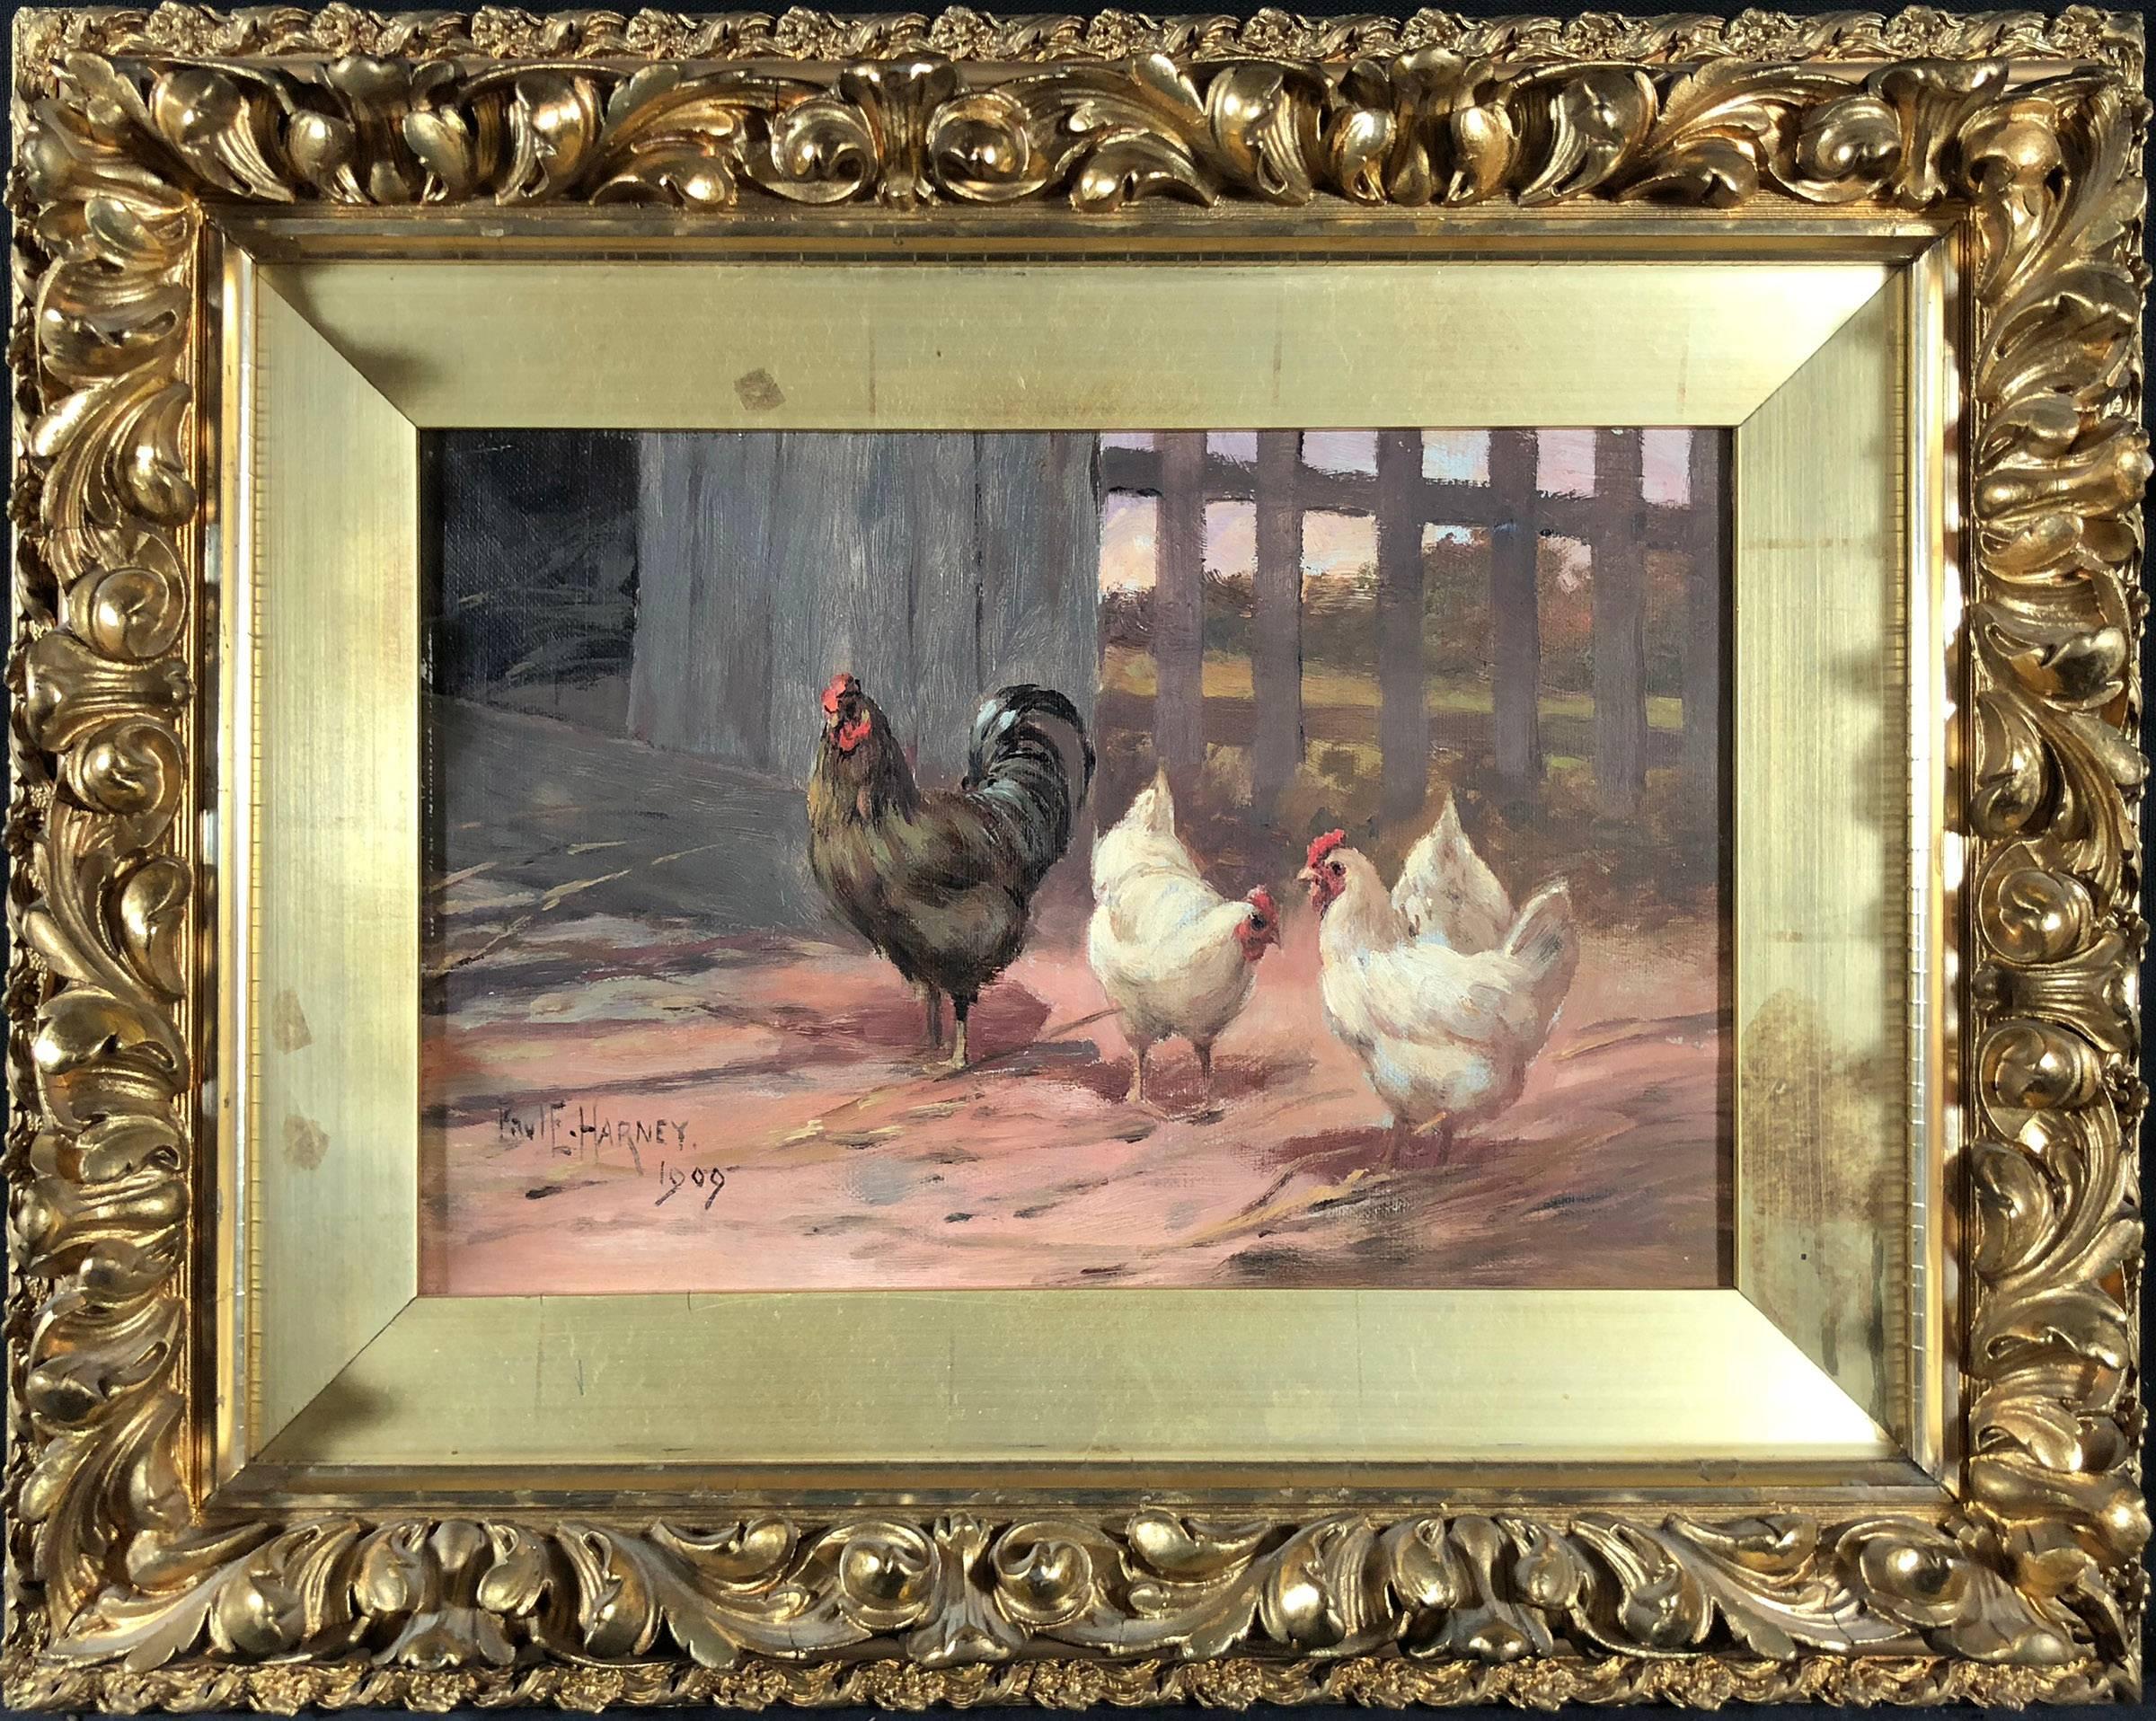 Feeding Time - Painting by Paul E. Harney Jr.